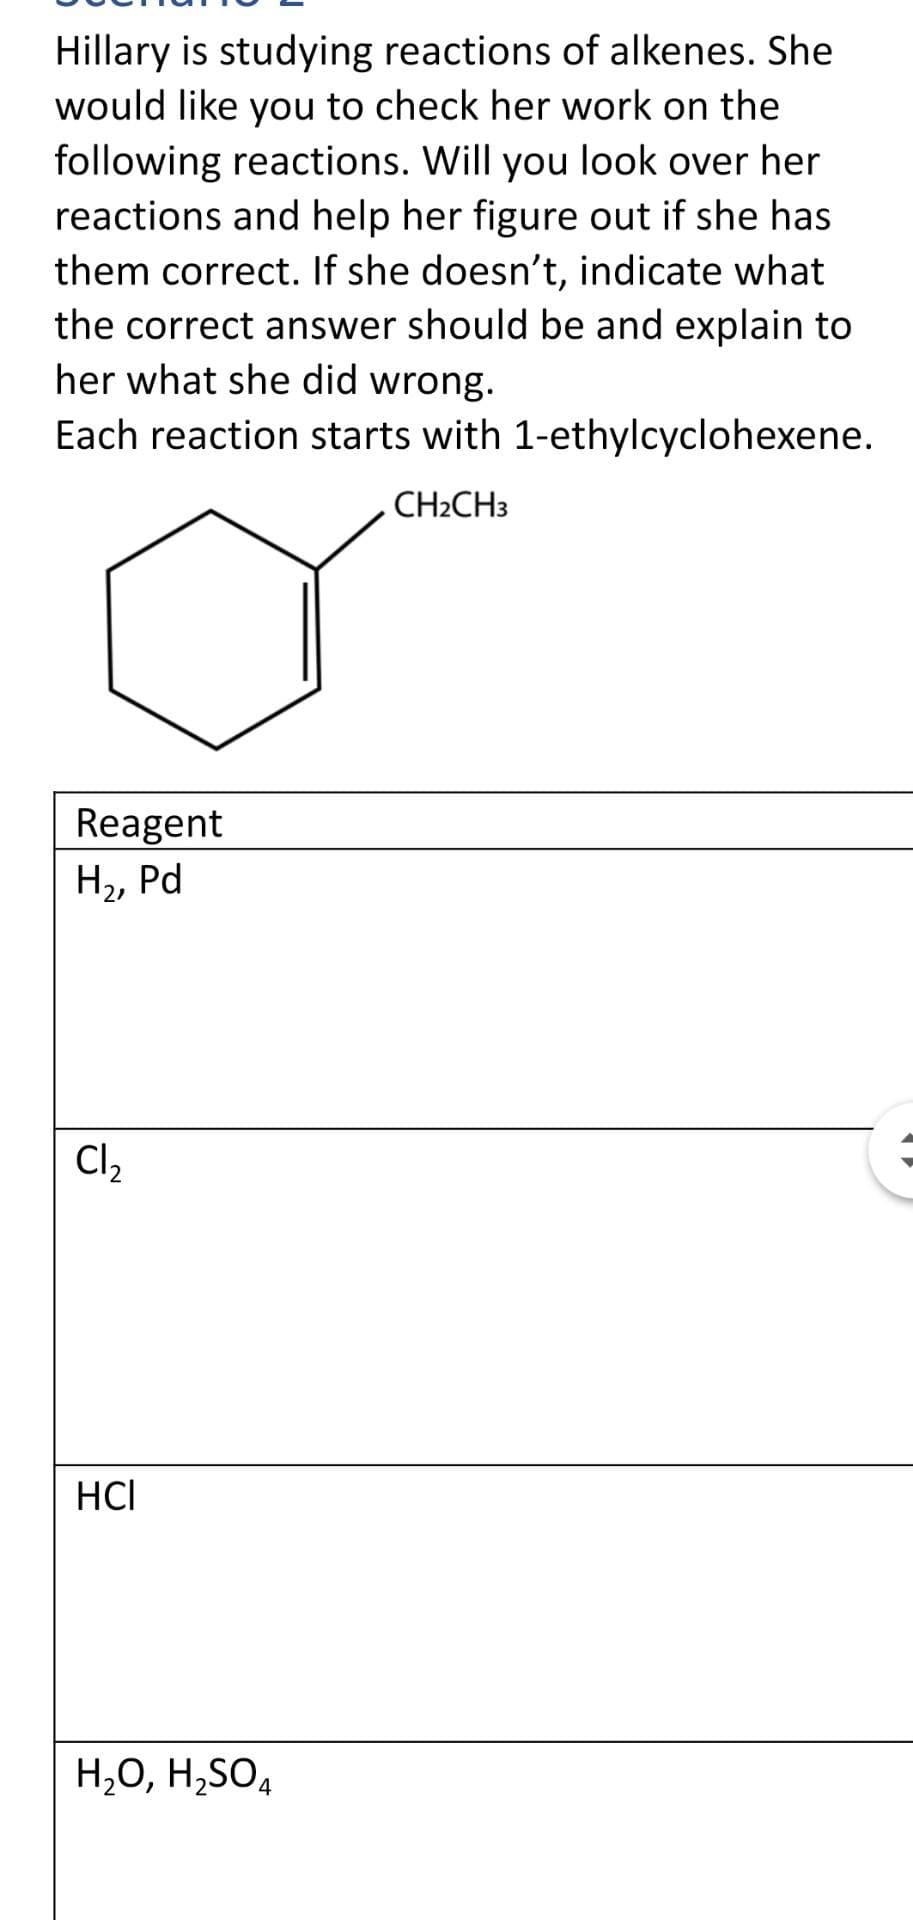 Hillary is studying reactions of alkenes. She
would like you to check her work on the
following reactions. Will you look over her
reactions and help her figure out if she has
them correct. If she doesn't, indicate what
the correct answer should be and explain to
her what she did wrong.
Each reaction starts with 1-ethylcyclohexene.
CH2CH3
Reagent
Н, Pd
Cl2
HCI
H,O, H,SO4
